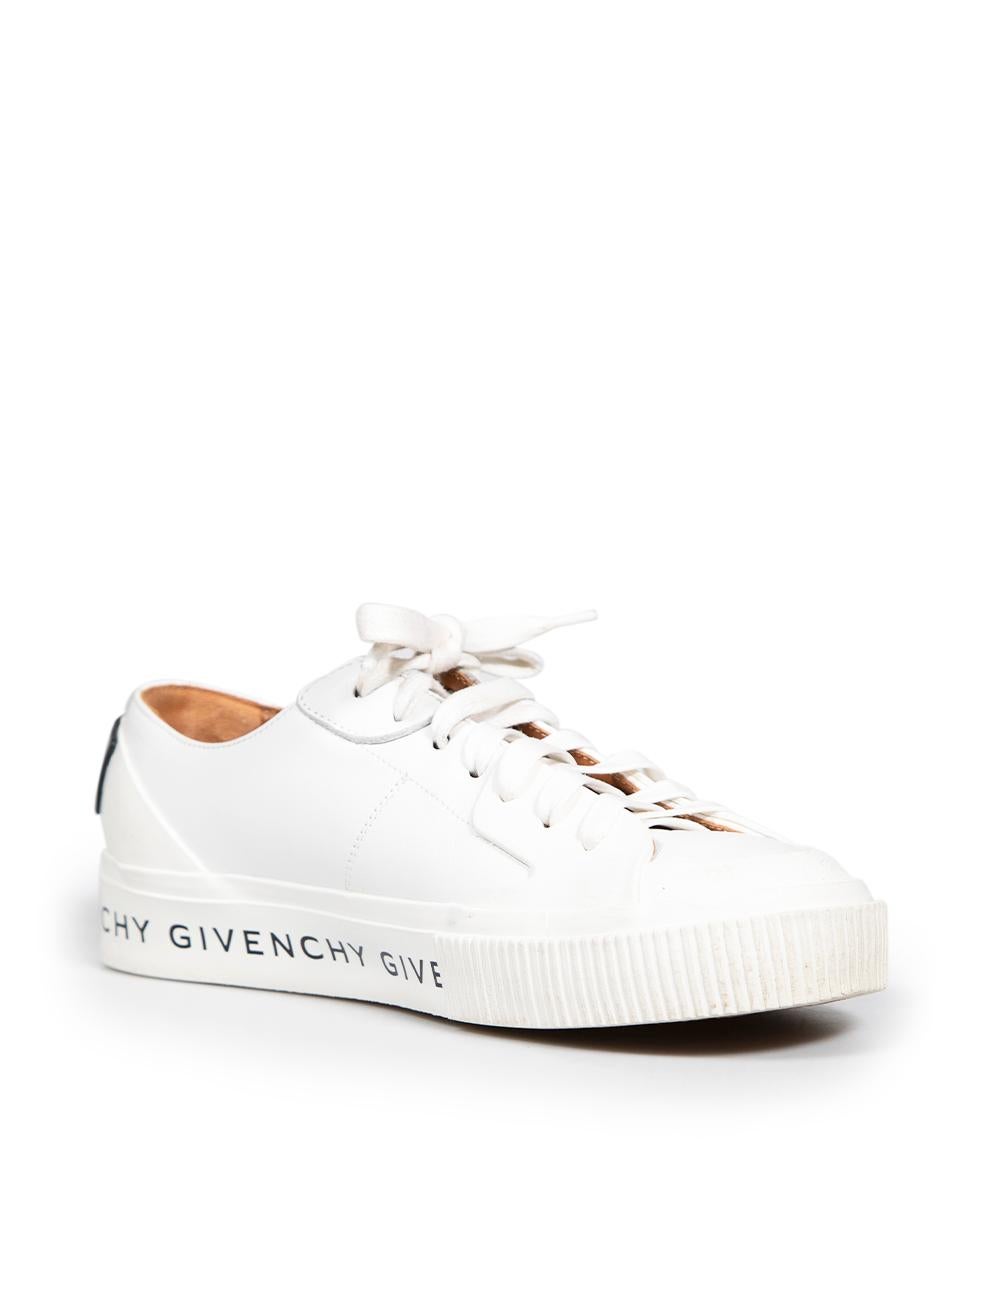 CONDITION is Very good. Minimal wear to trainers is evident. Minimal wear to laces and soles on this used Givenchy designer resale item.
 
 Details
 White
 Leather
 Trainers
 Logo sole detail
 Low top
 Round toe
 Lace up fastening
 
 
 Made in